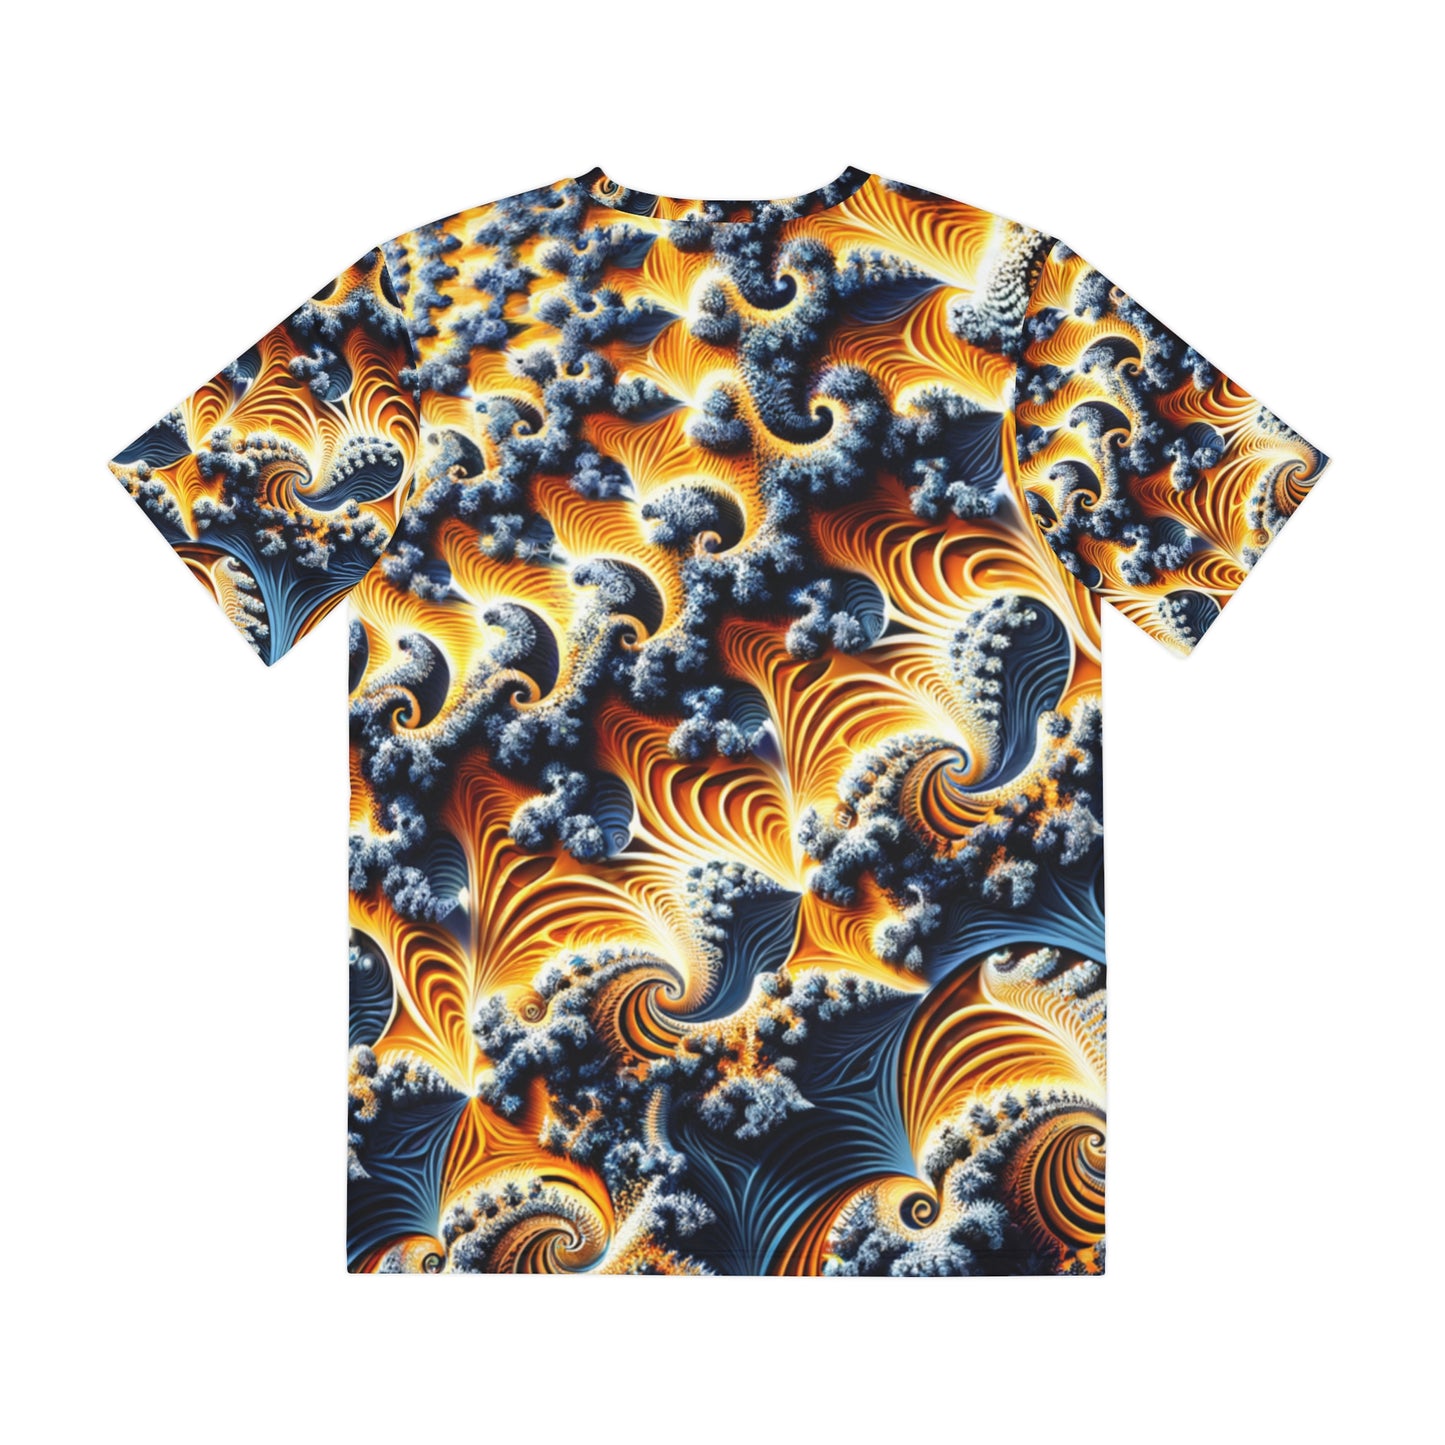 Back view of the Celestial Spirals & Waves Crewneck Pullover All-Over Print Short-Sleeved Shirt yellow blue black white orange celestial pattern